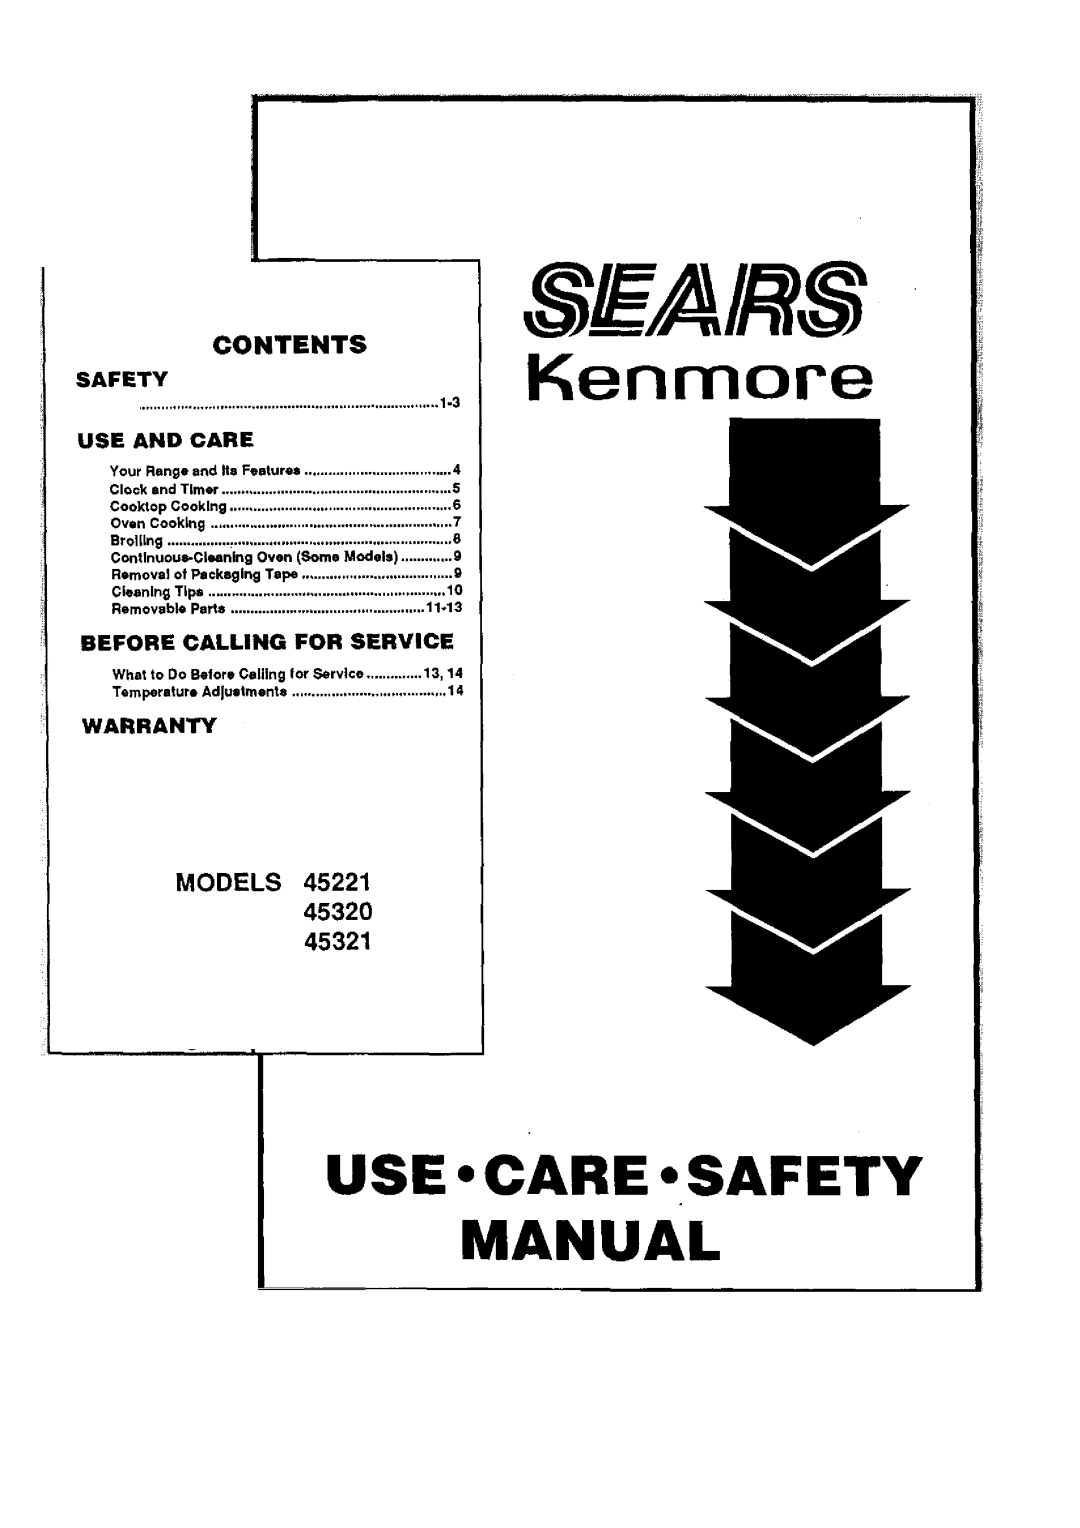 Sears 45221, 45321, 45320 warranty Use Care Safety Manual, Contents, Models, Kenmore 